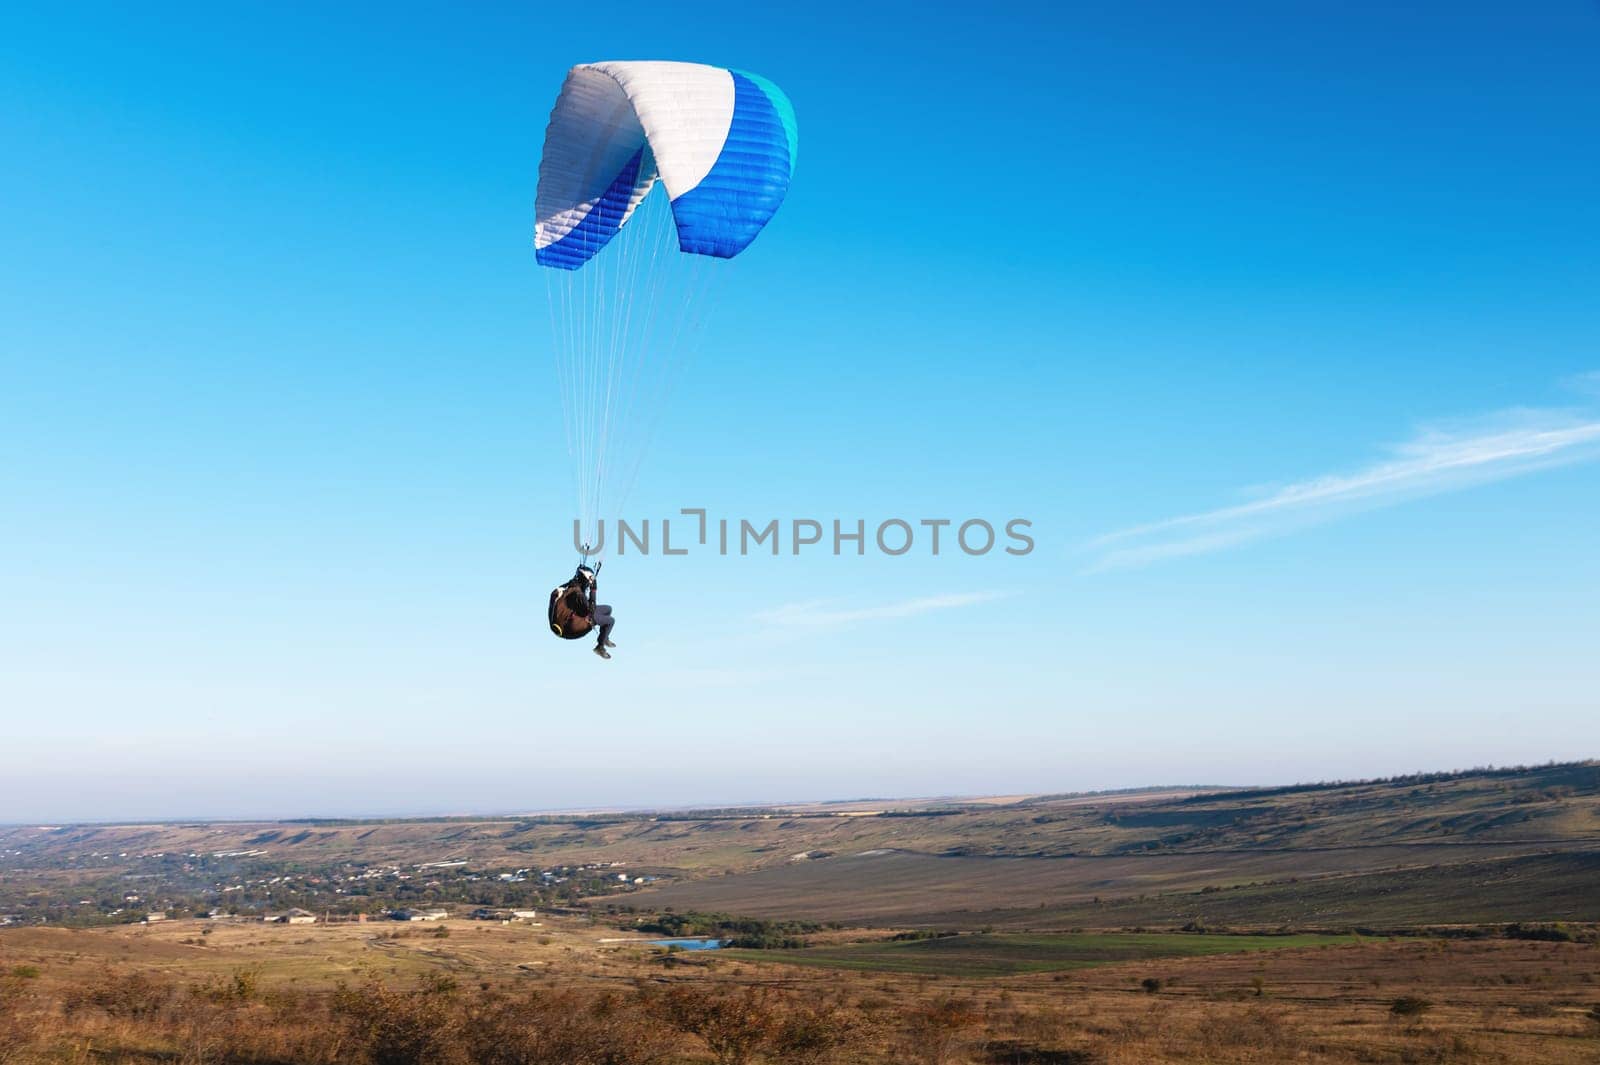 A paraglider takes off from a mountainside with a blue and white canopy and the sun behind. A paraglider is a silhouette. The glider is sharp, with little wing movement. by yanik88